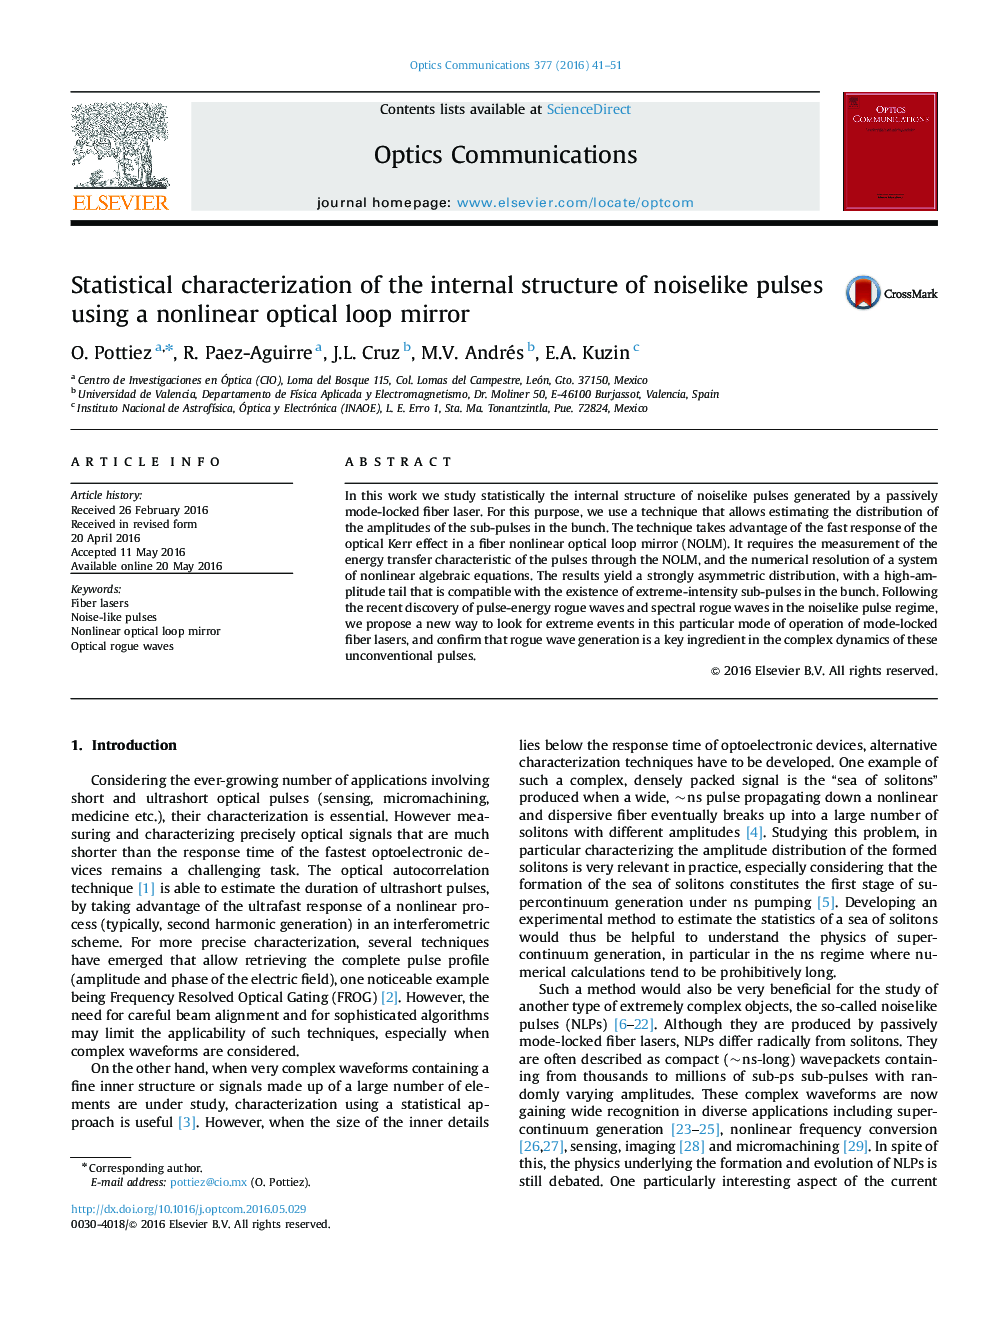 Statistical characterization of the internal structure of noiselike pulses using a nonlinear optical loop mirror